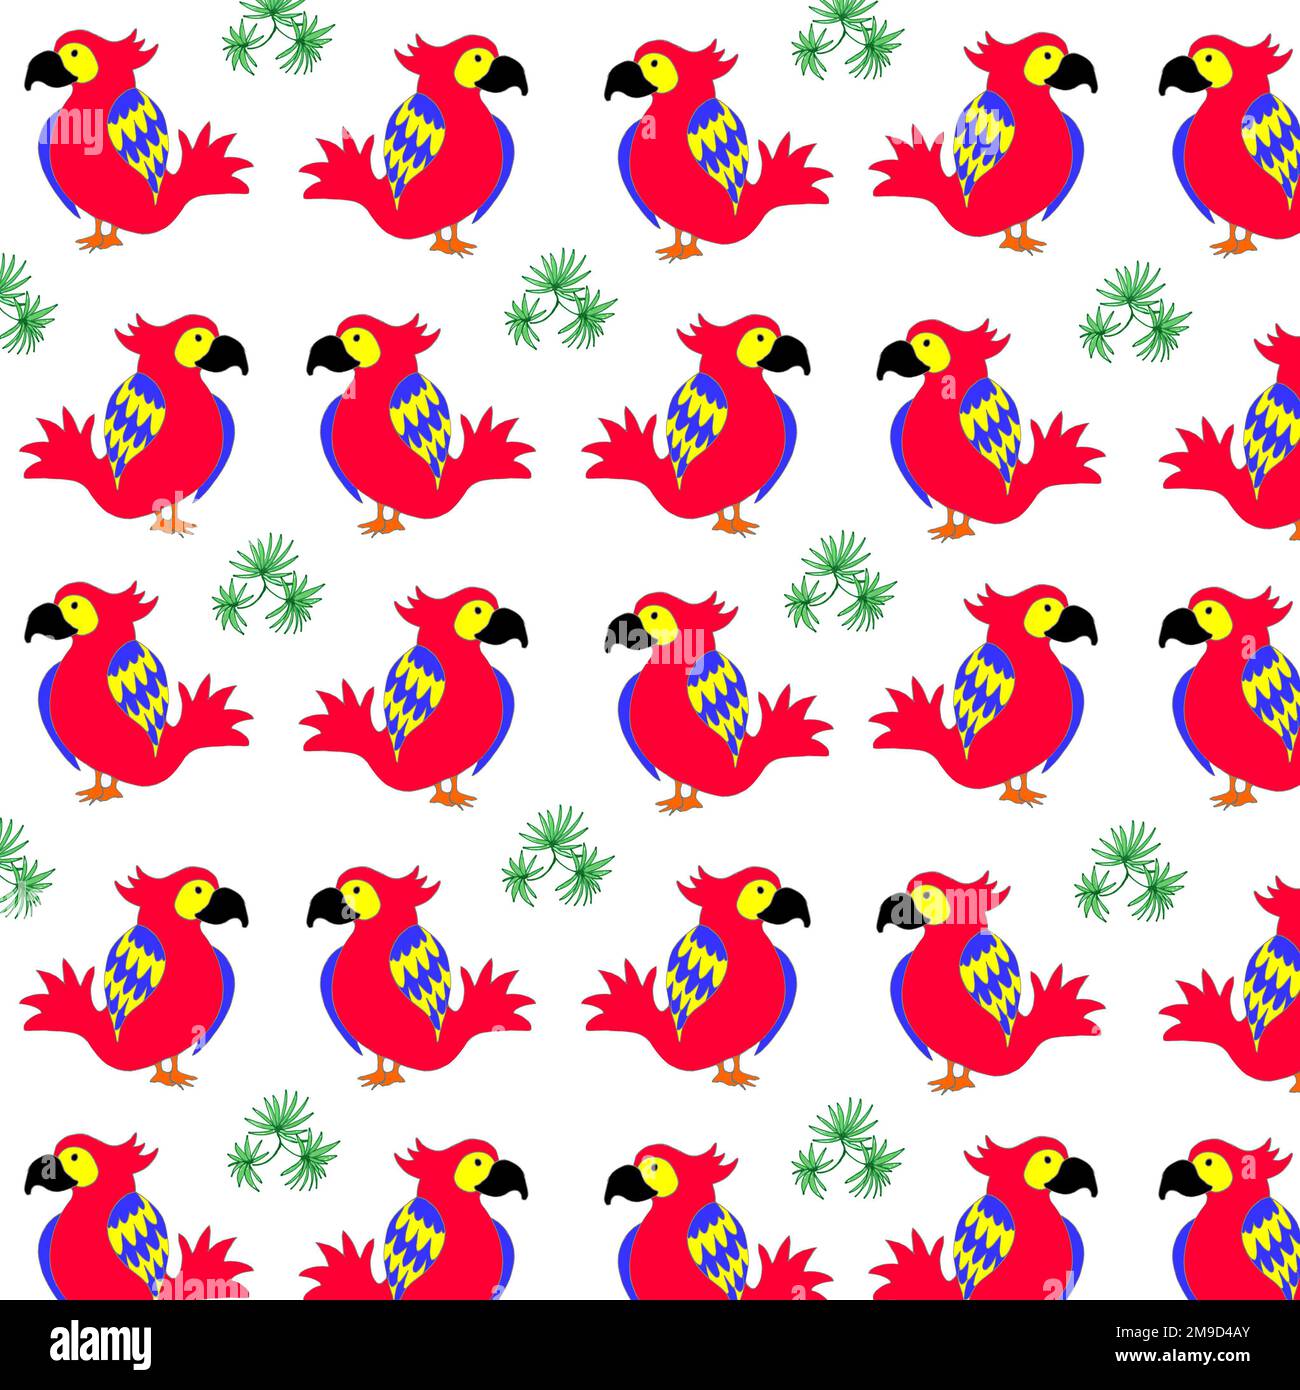 Brightly-coloured parrots repeating pattern. Stock Photo